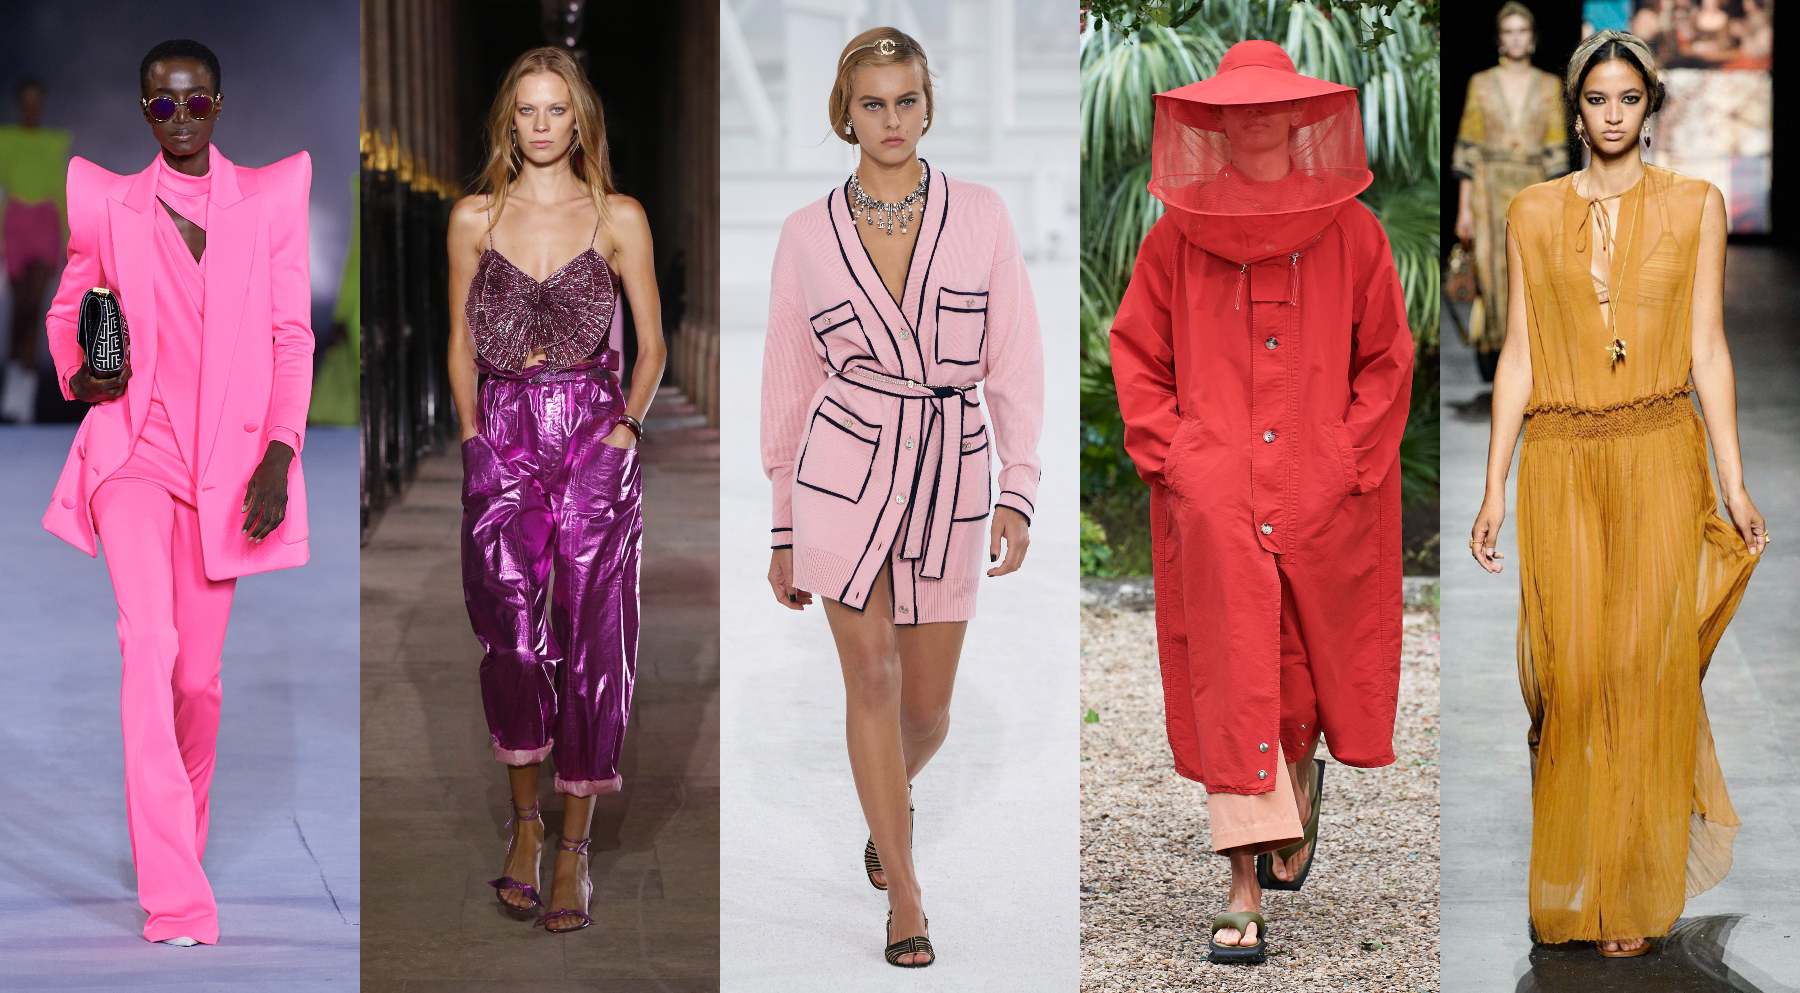 Paris Fashion Week SS21: Of beekeeper veils and throwback looks